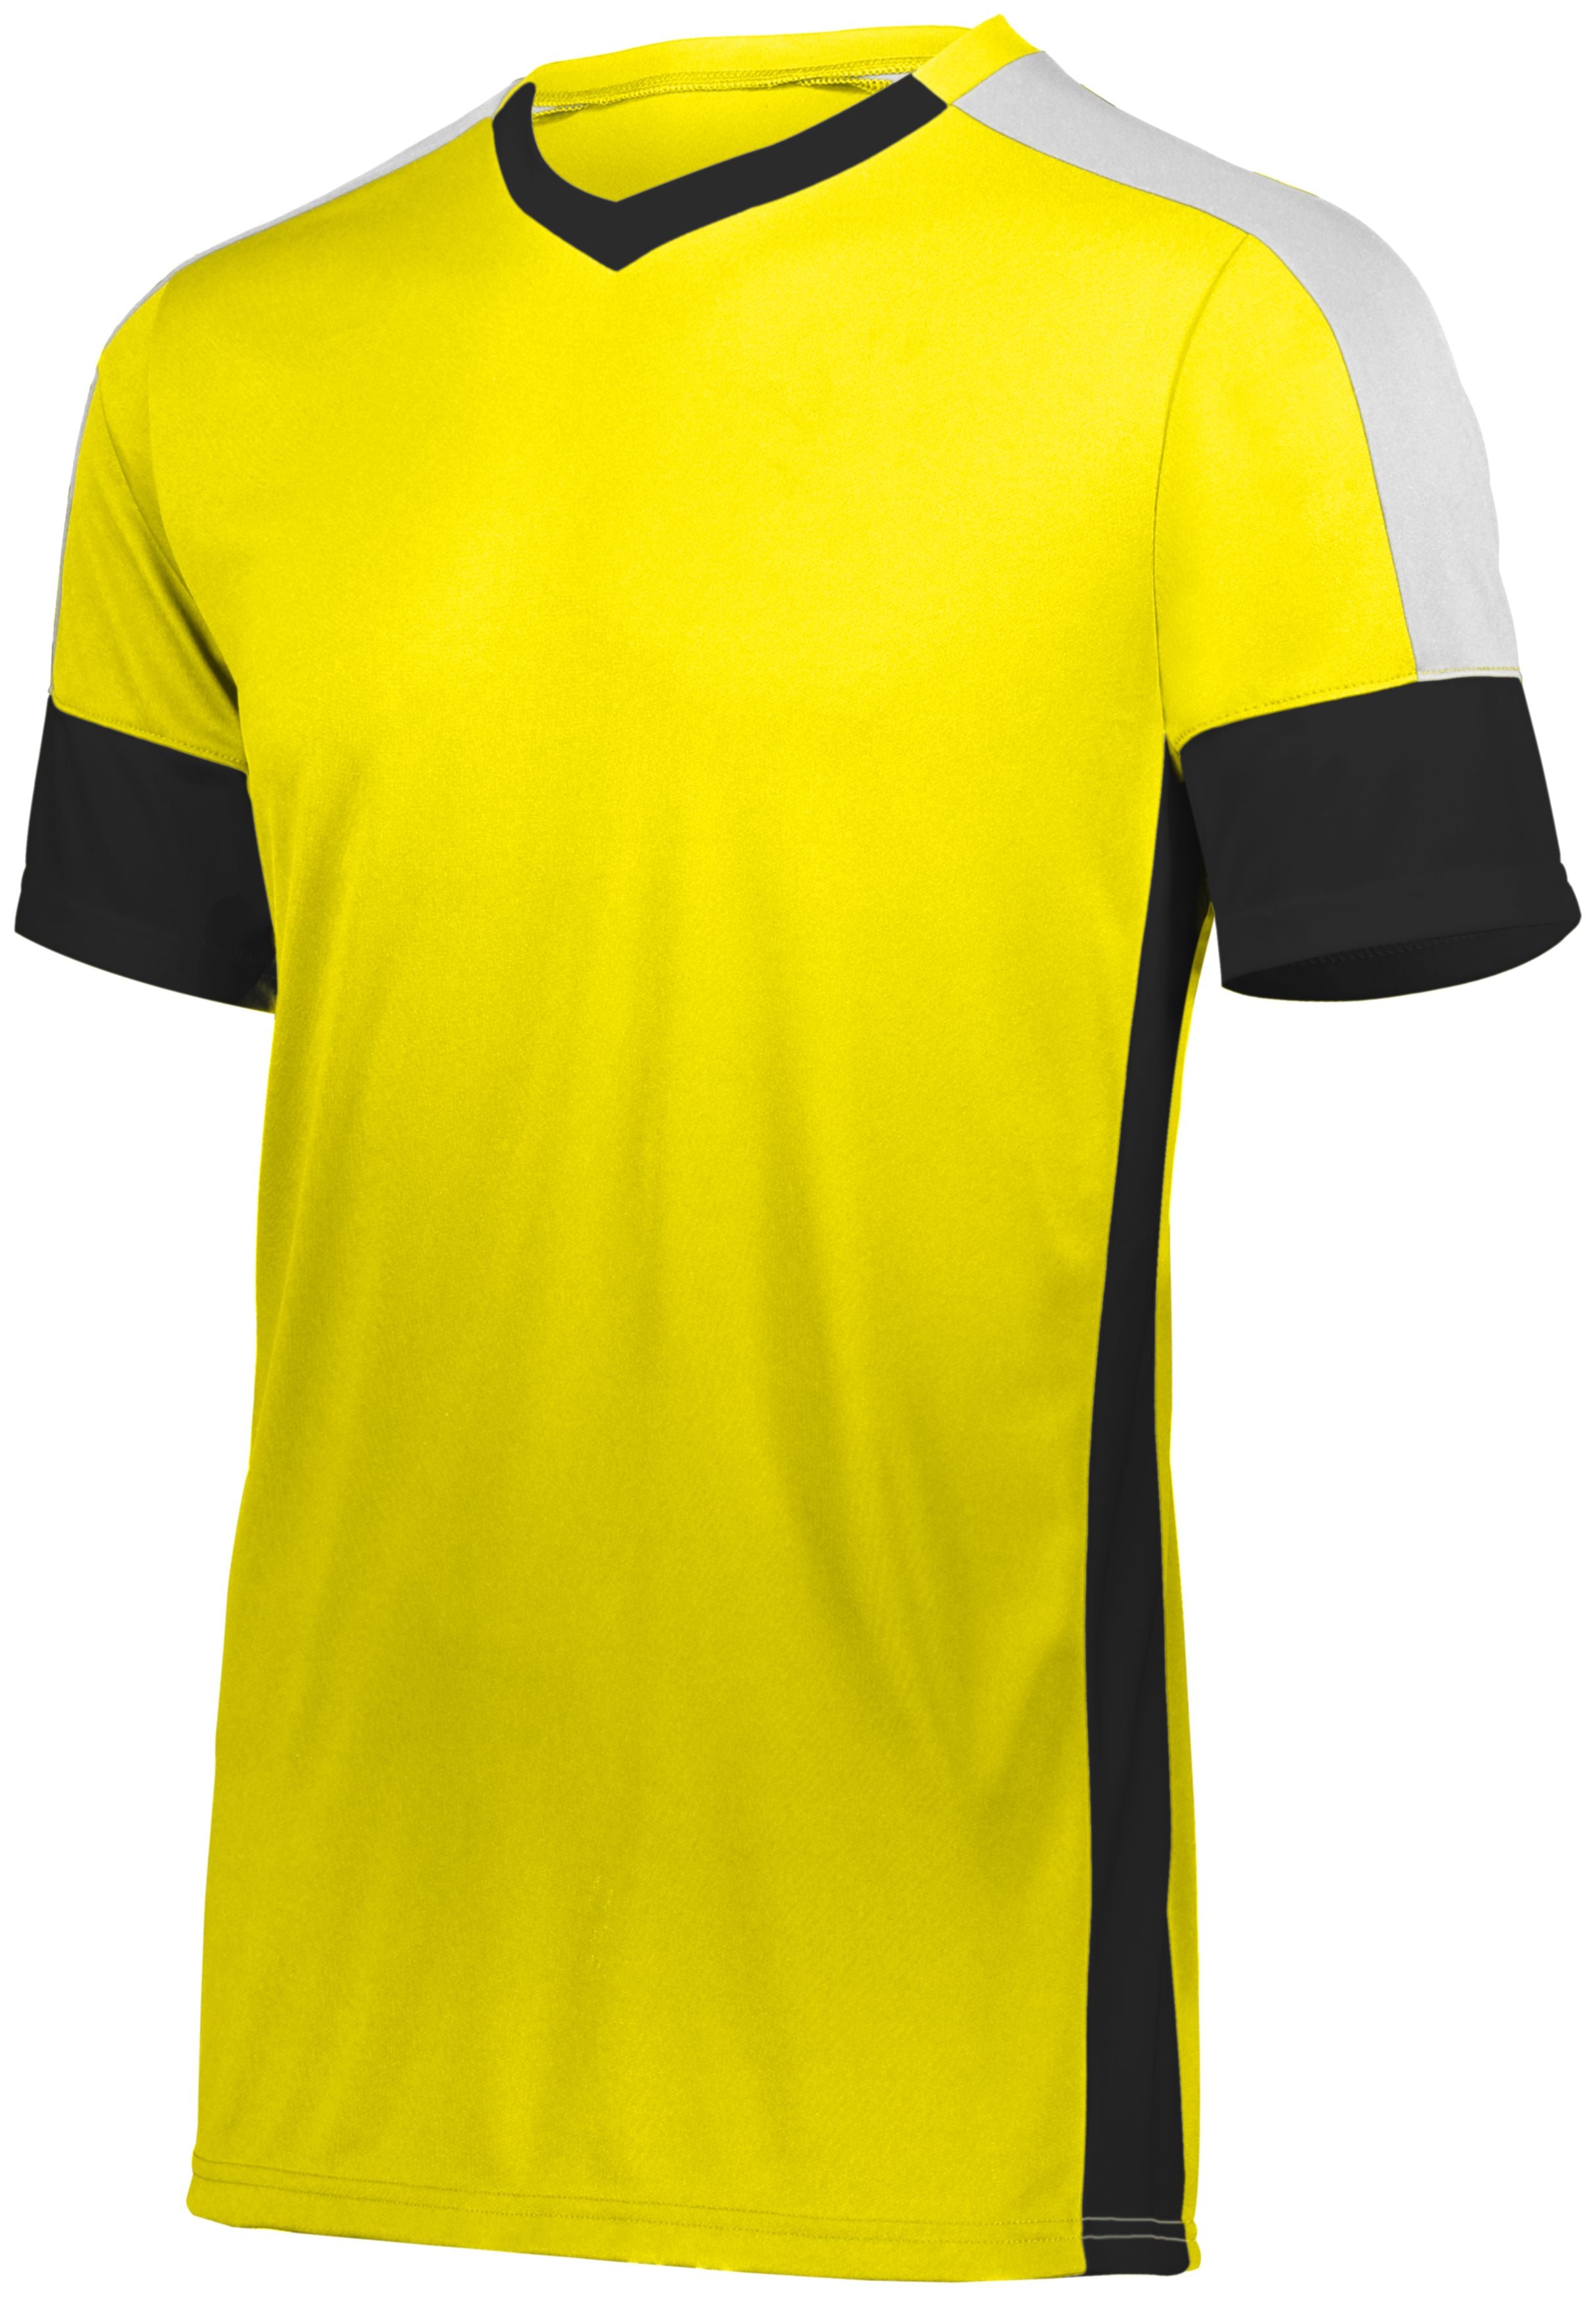 High 5 Youth Wembley Soccer Jersey in Power Yellow/Black/White  -Part of the Youth, Youth-Jersey, High5-Products, Soccer, Shirts, All-Sports-1 product lines at KanaleyCreations.com